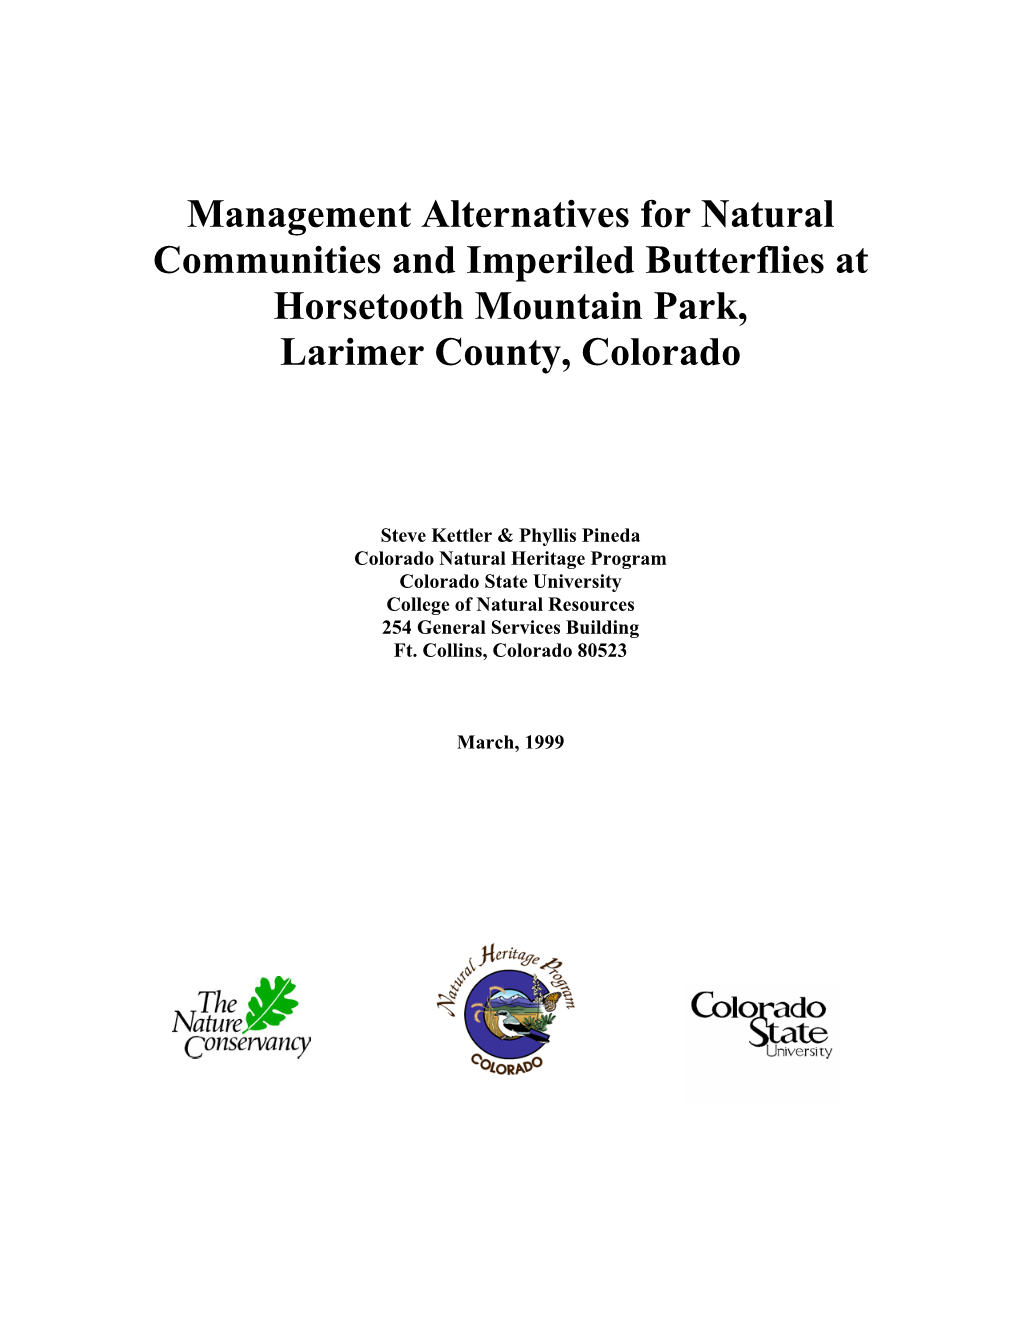 Management Alternatives for Natural Communities and Imperiled Butterflies at Horsetooth Mountain Park, Larimer County, Colorado